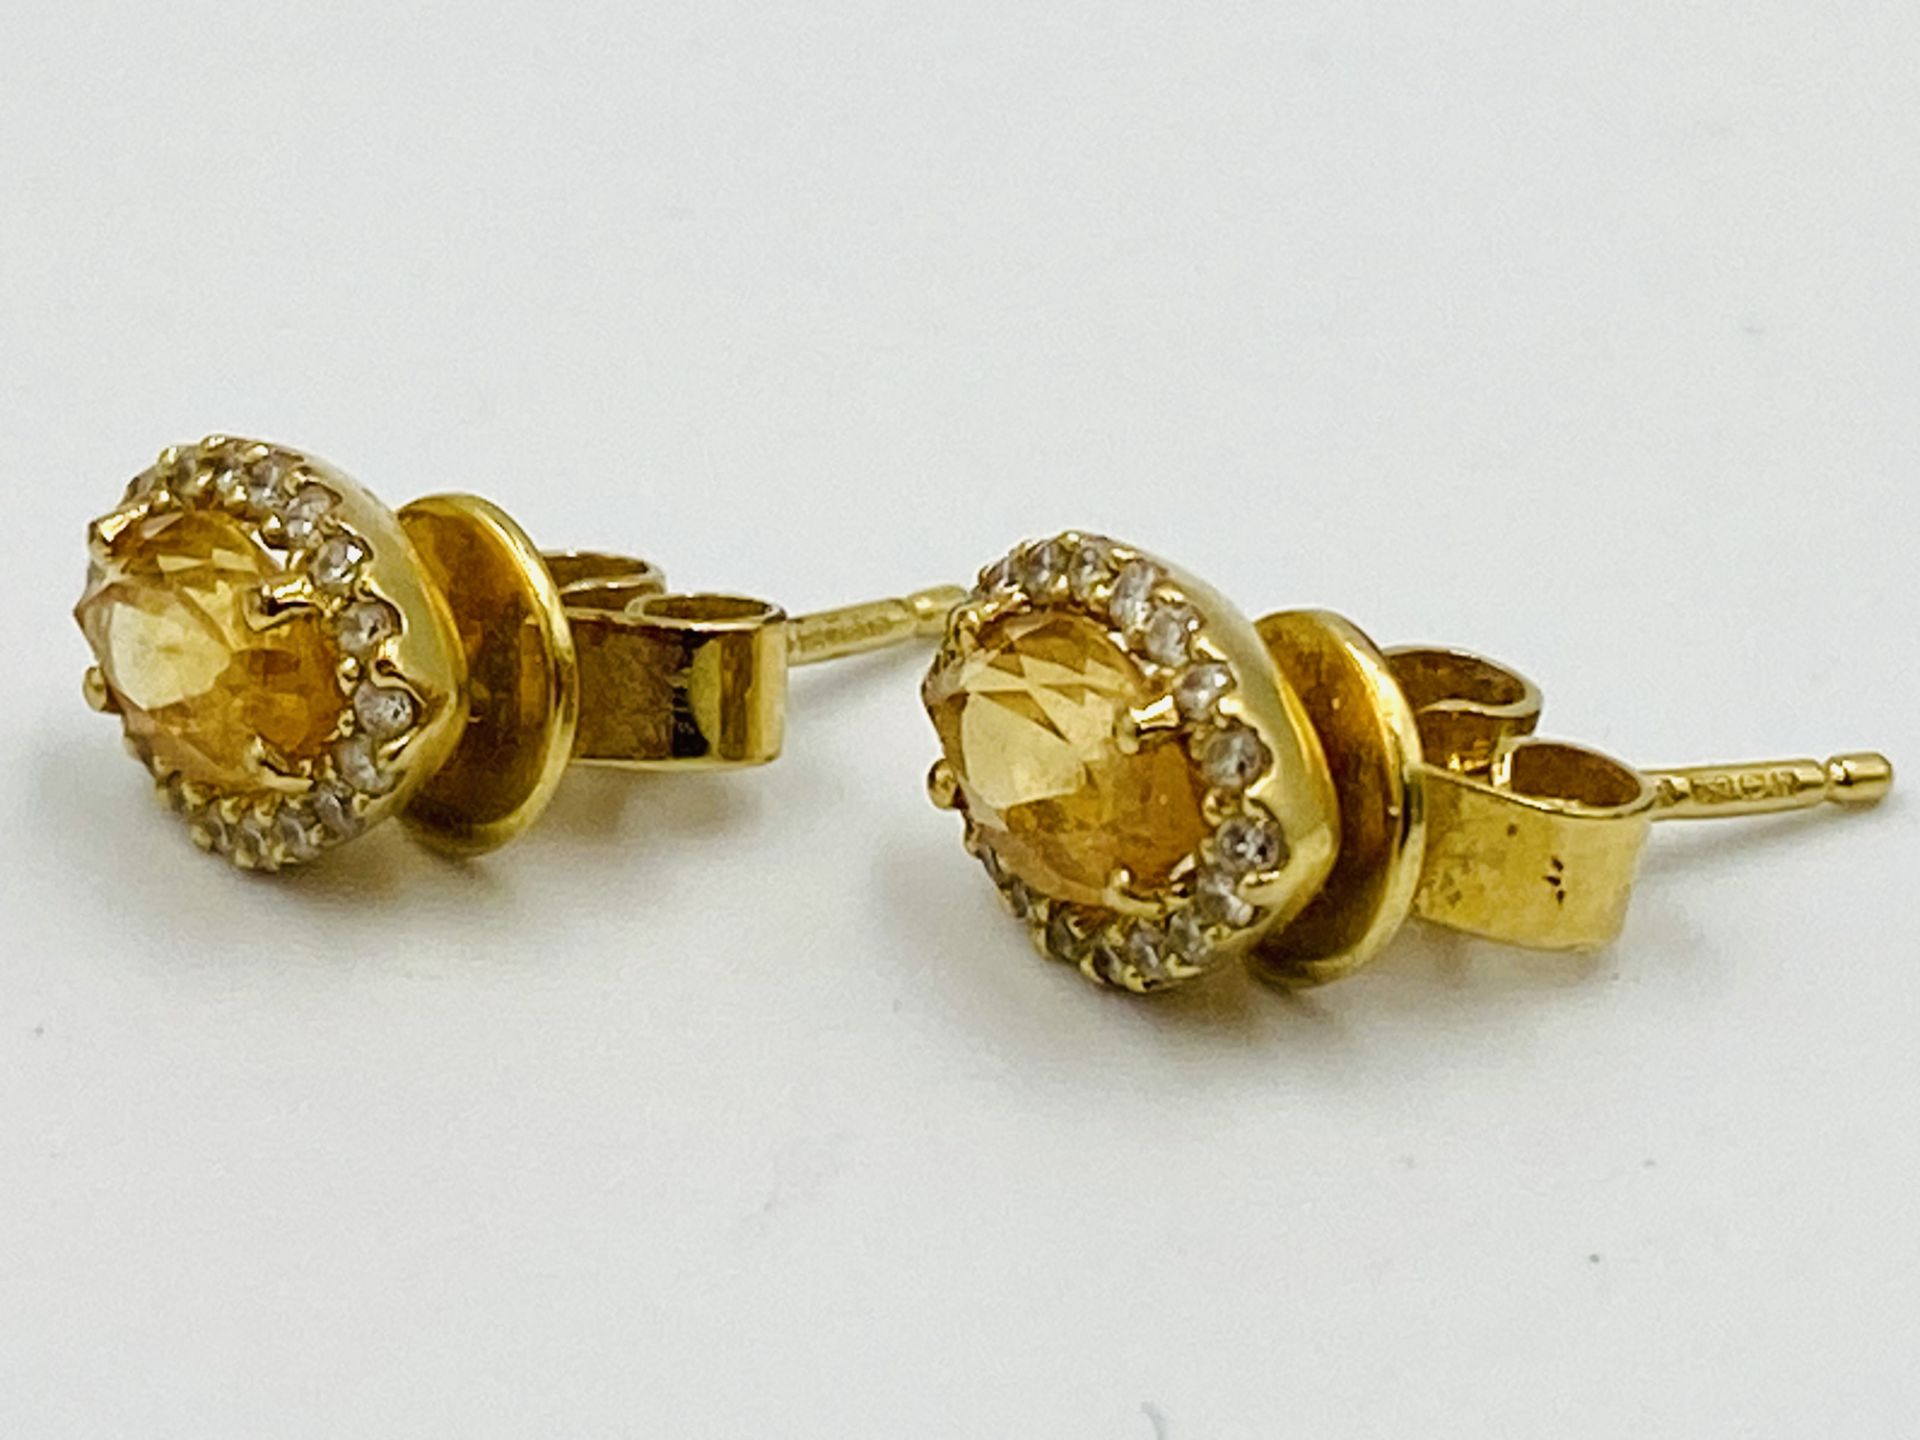 Pair of 18ct gold, citrine and diamond earrings - Image 2 of 4